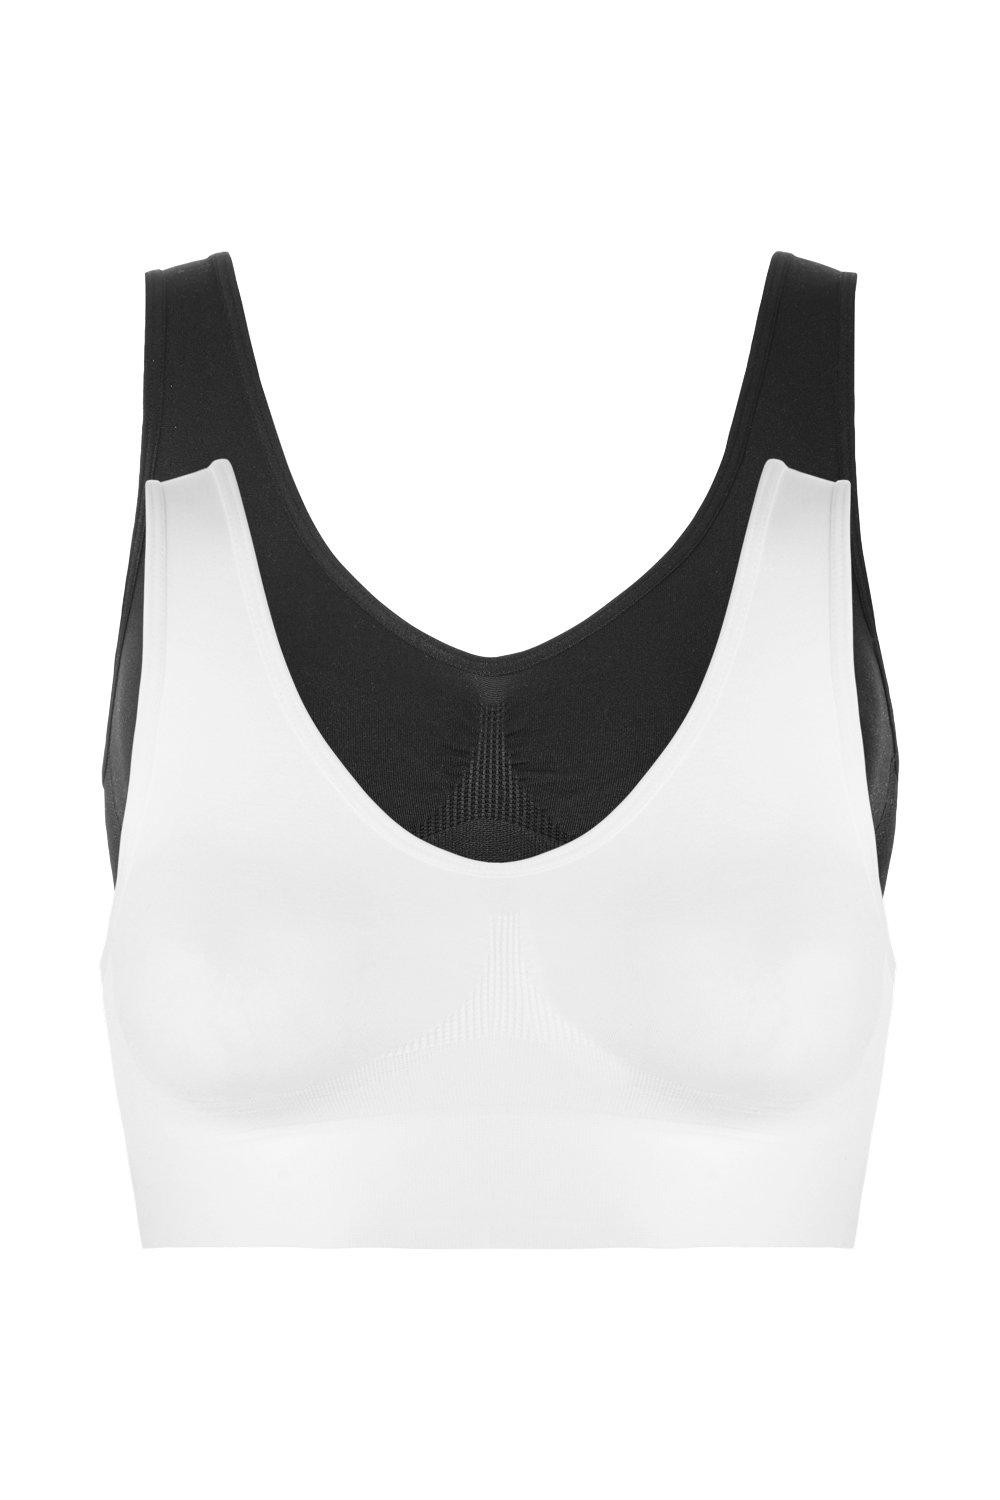 Comodo Sports bra white small Egyptian cotton 100% (Black, XL): Buy Online  at Best Price in Egypt - Souq is now